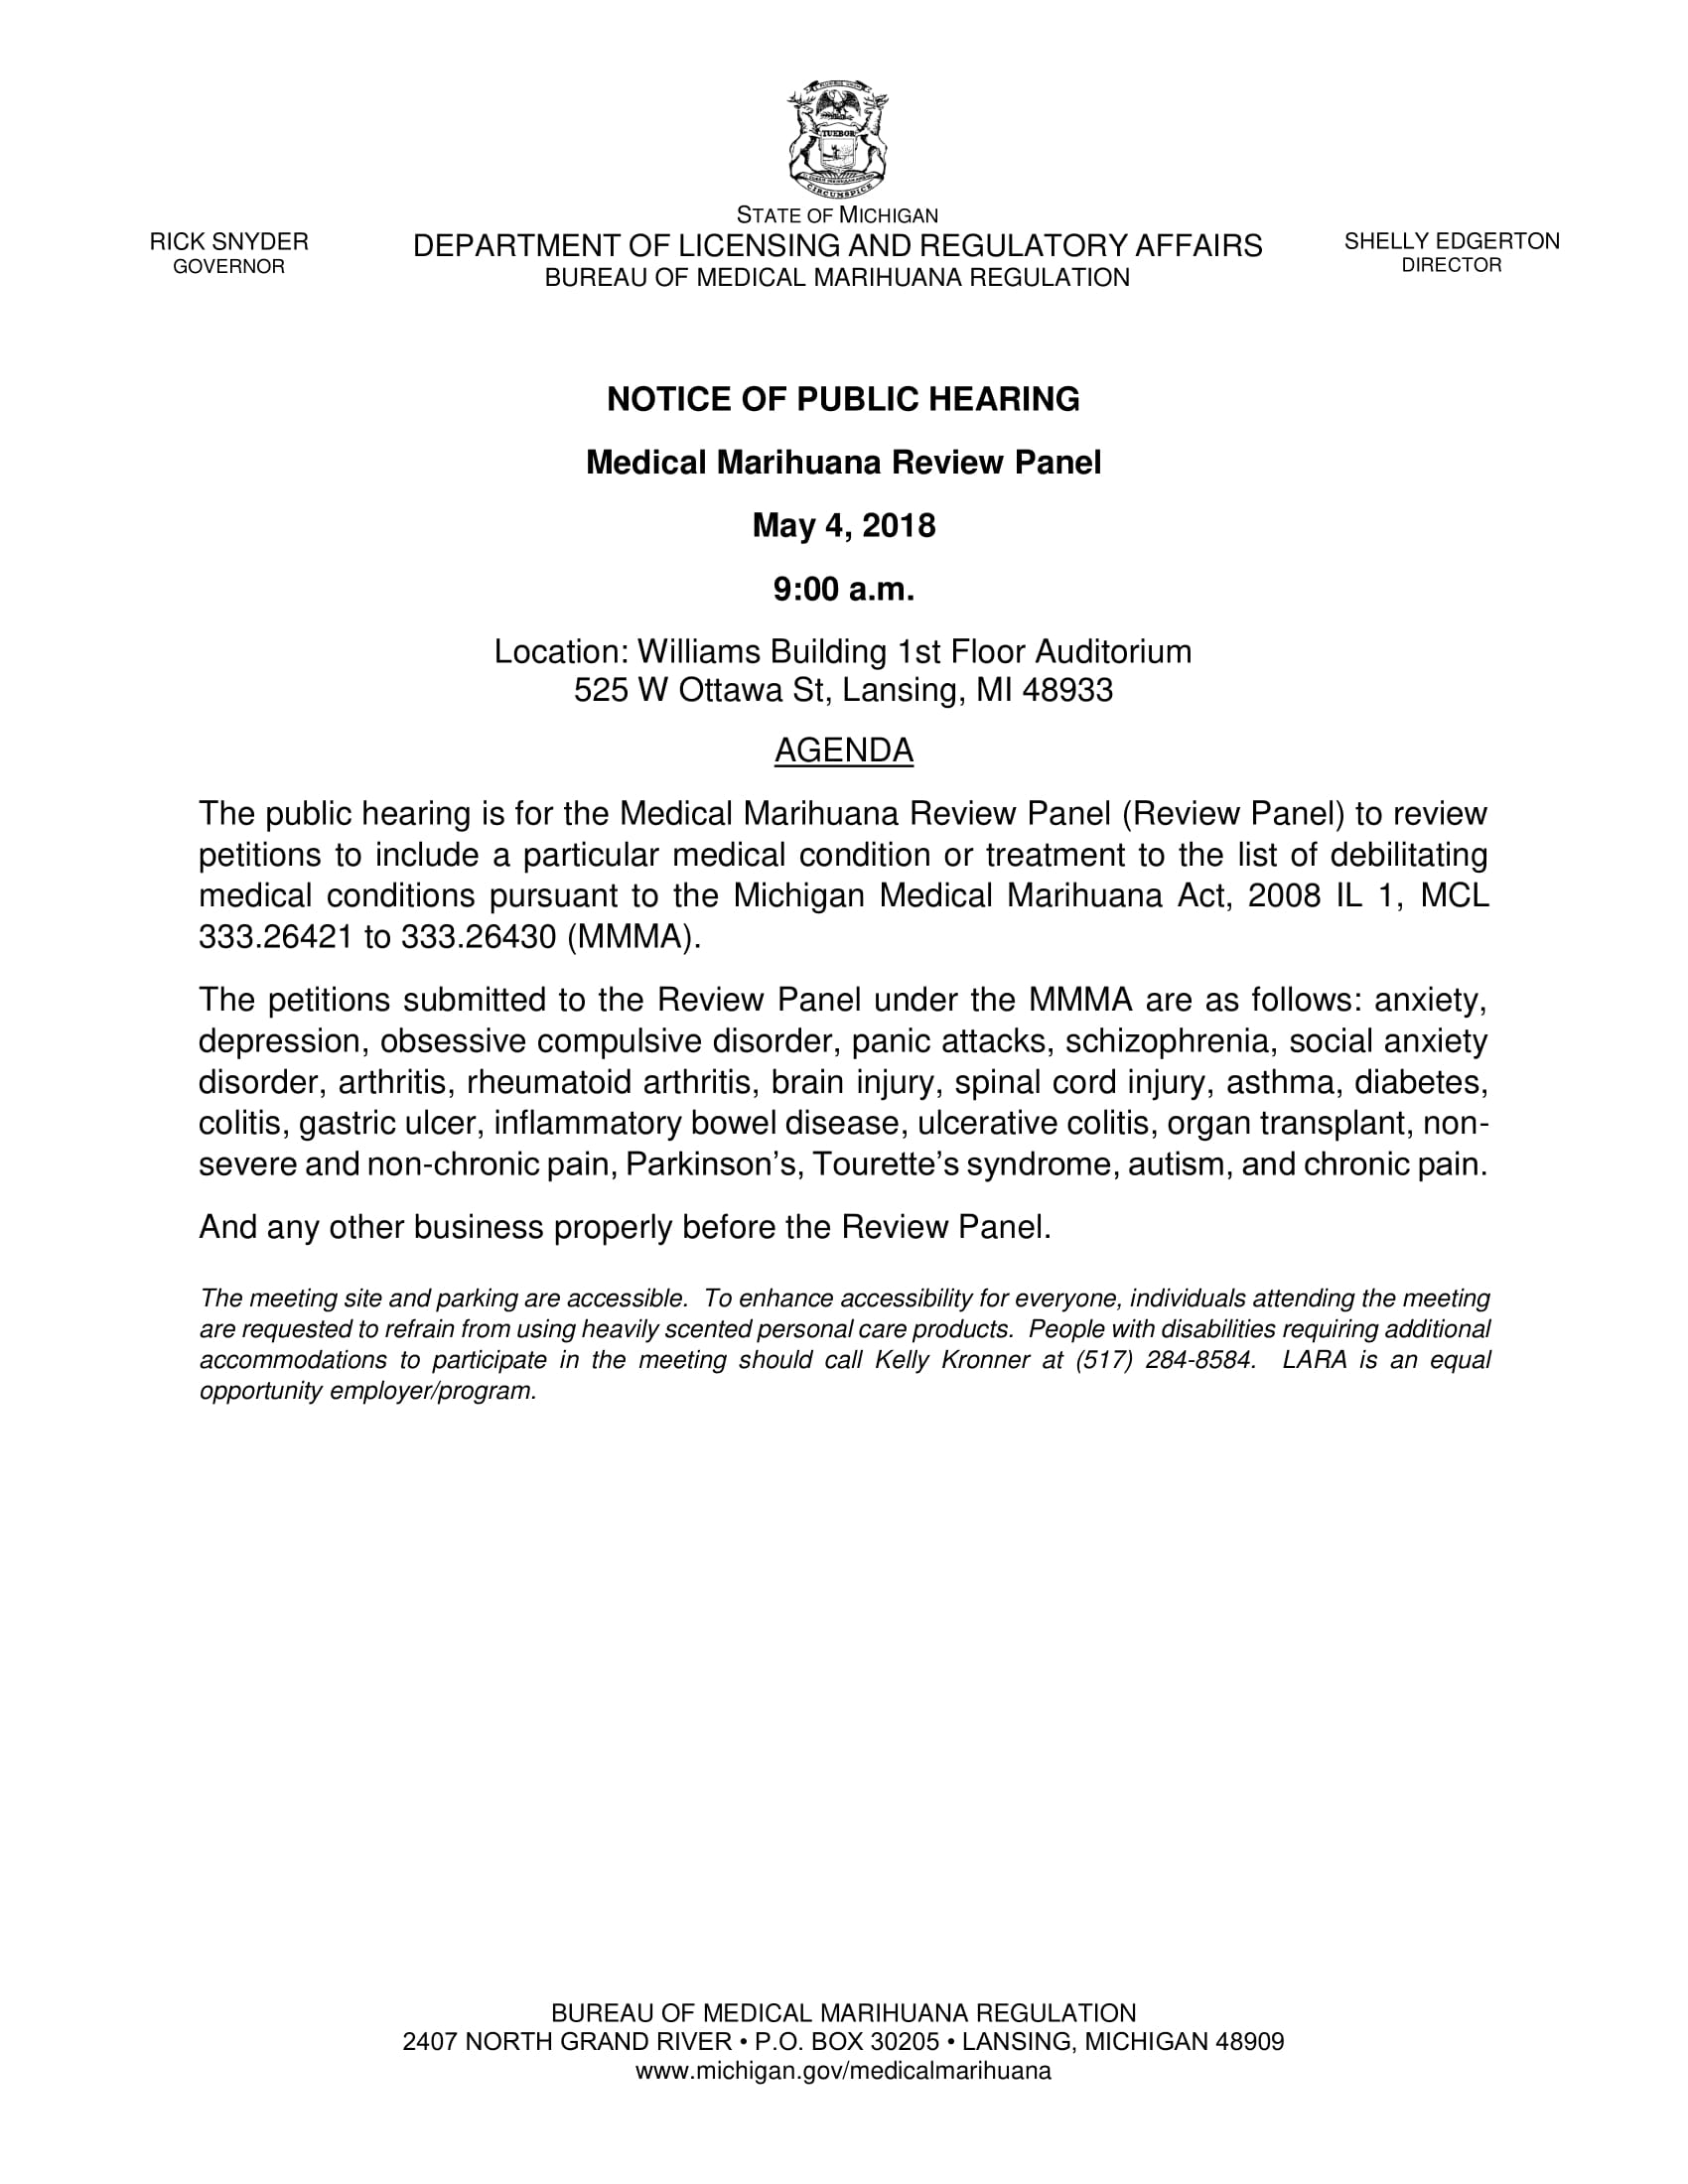 MMRP_Notice_of_Public_Hearing_5.4.18_618